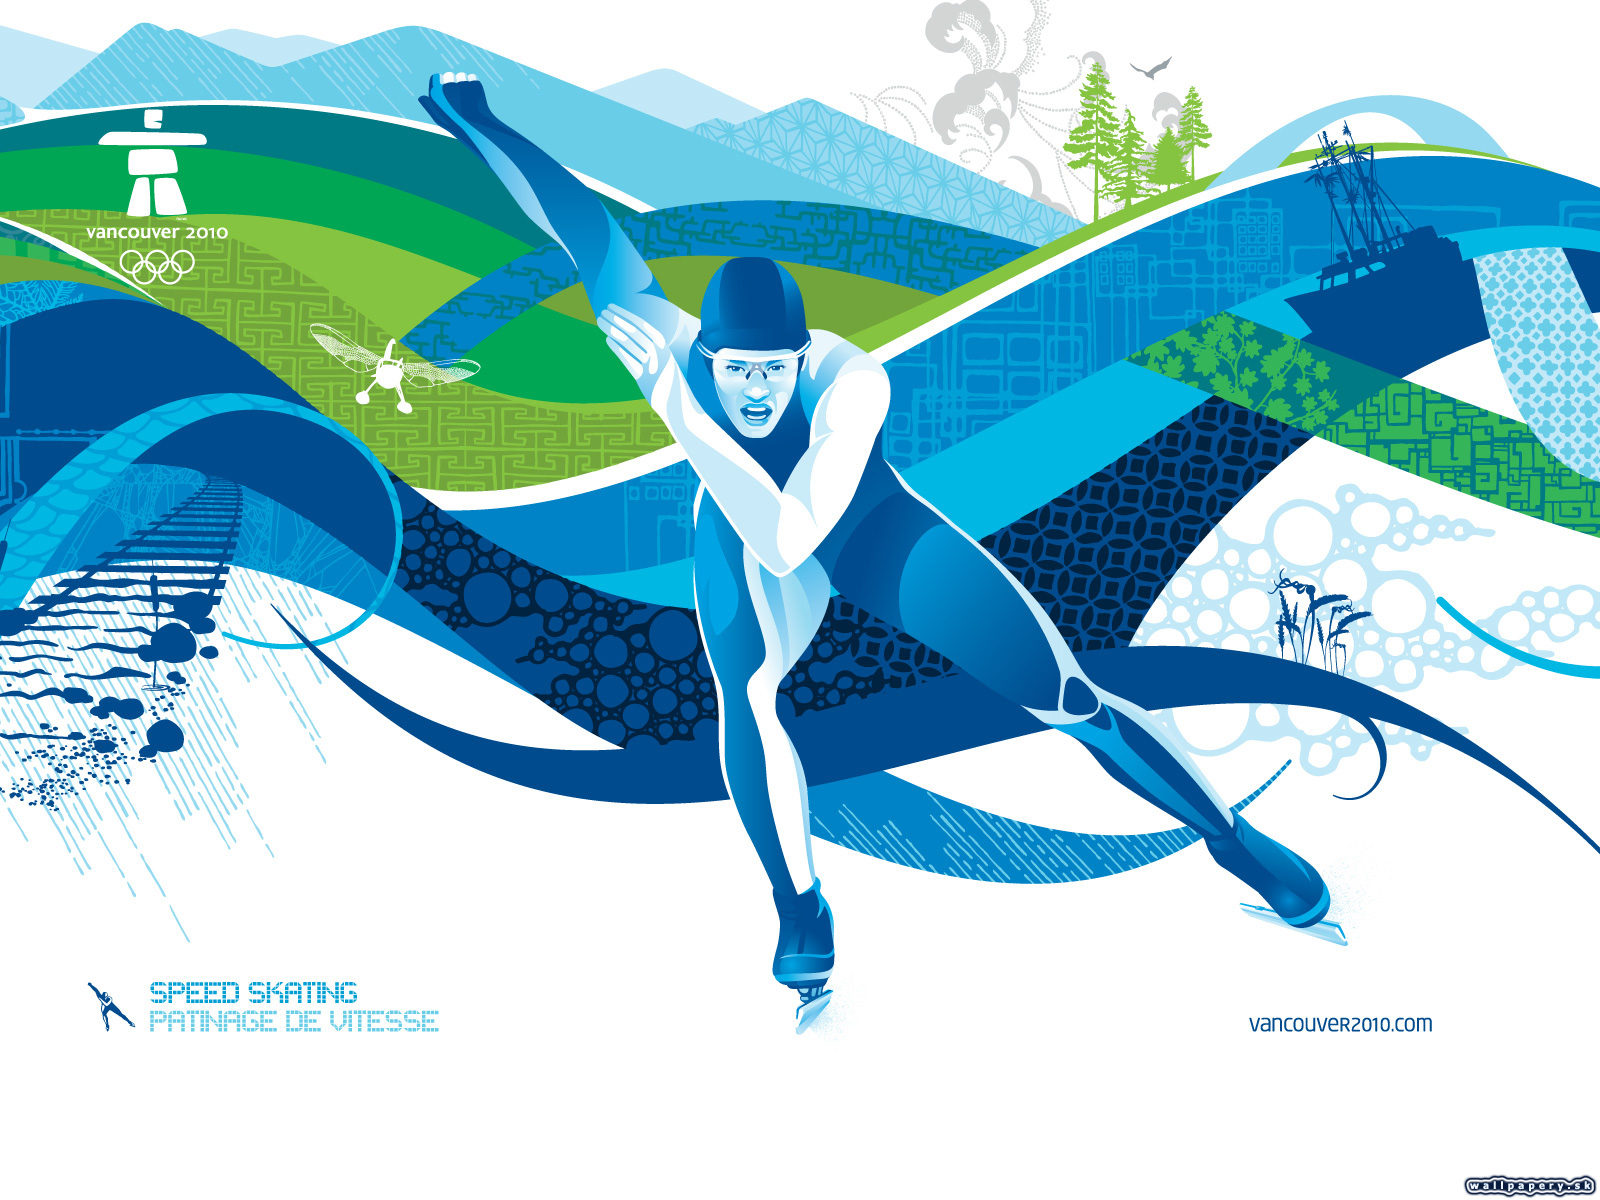 Vancouver 2010 - The Official Video Game of the Olympic Winter Games - wallpaper 6